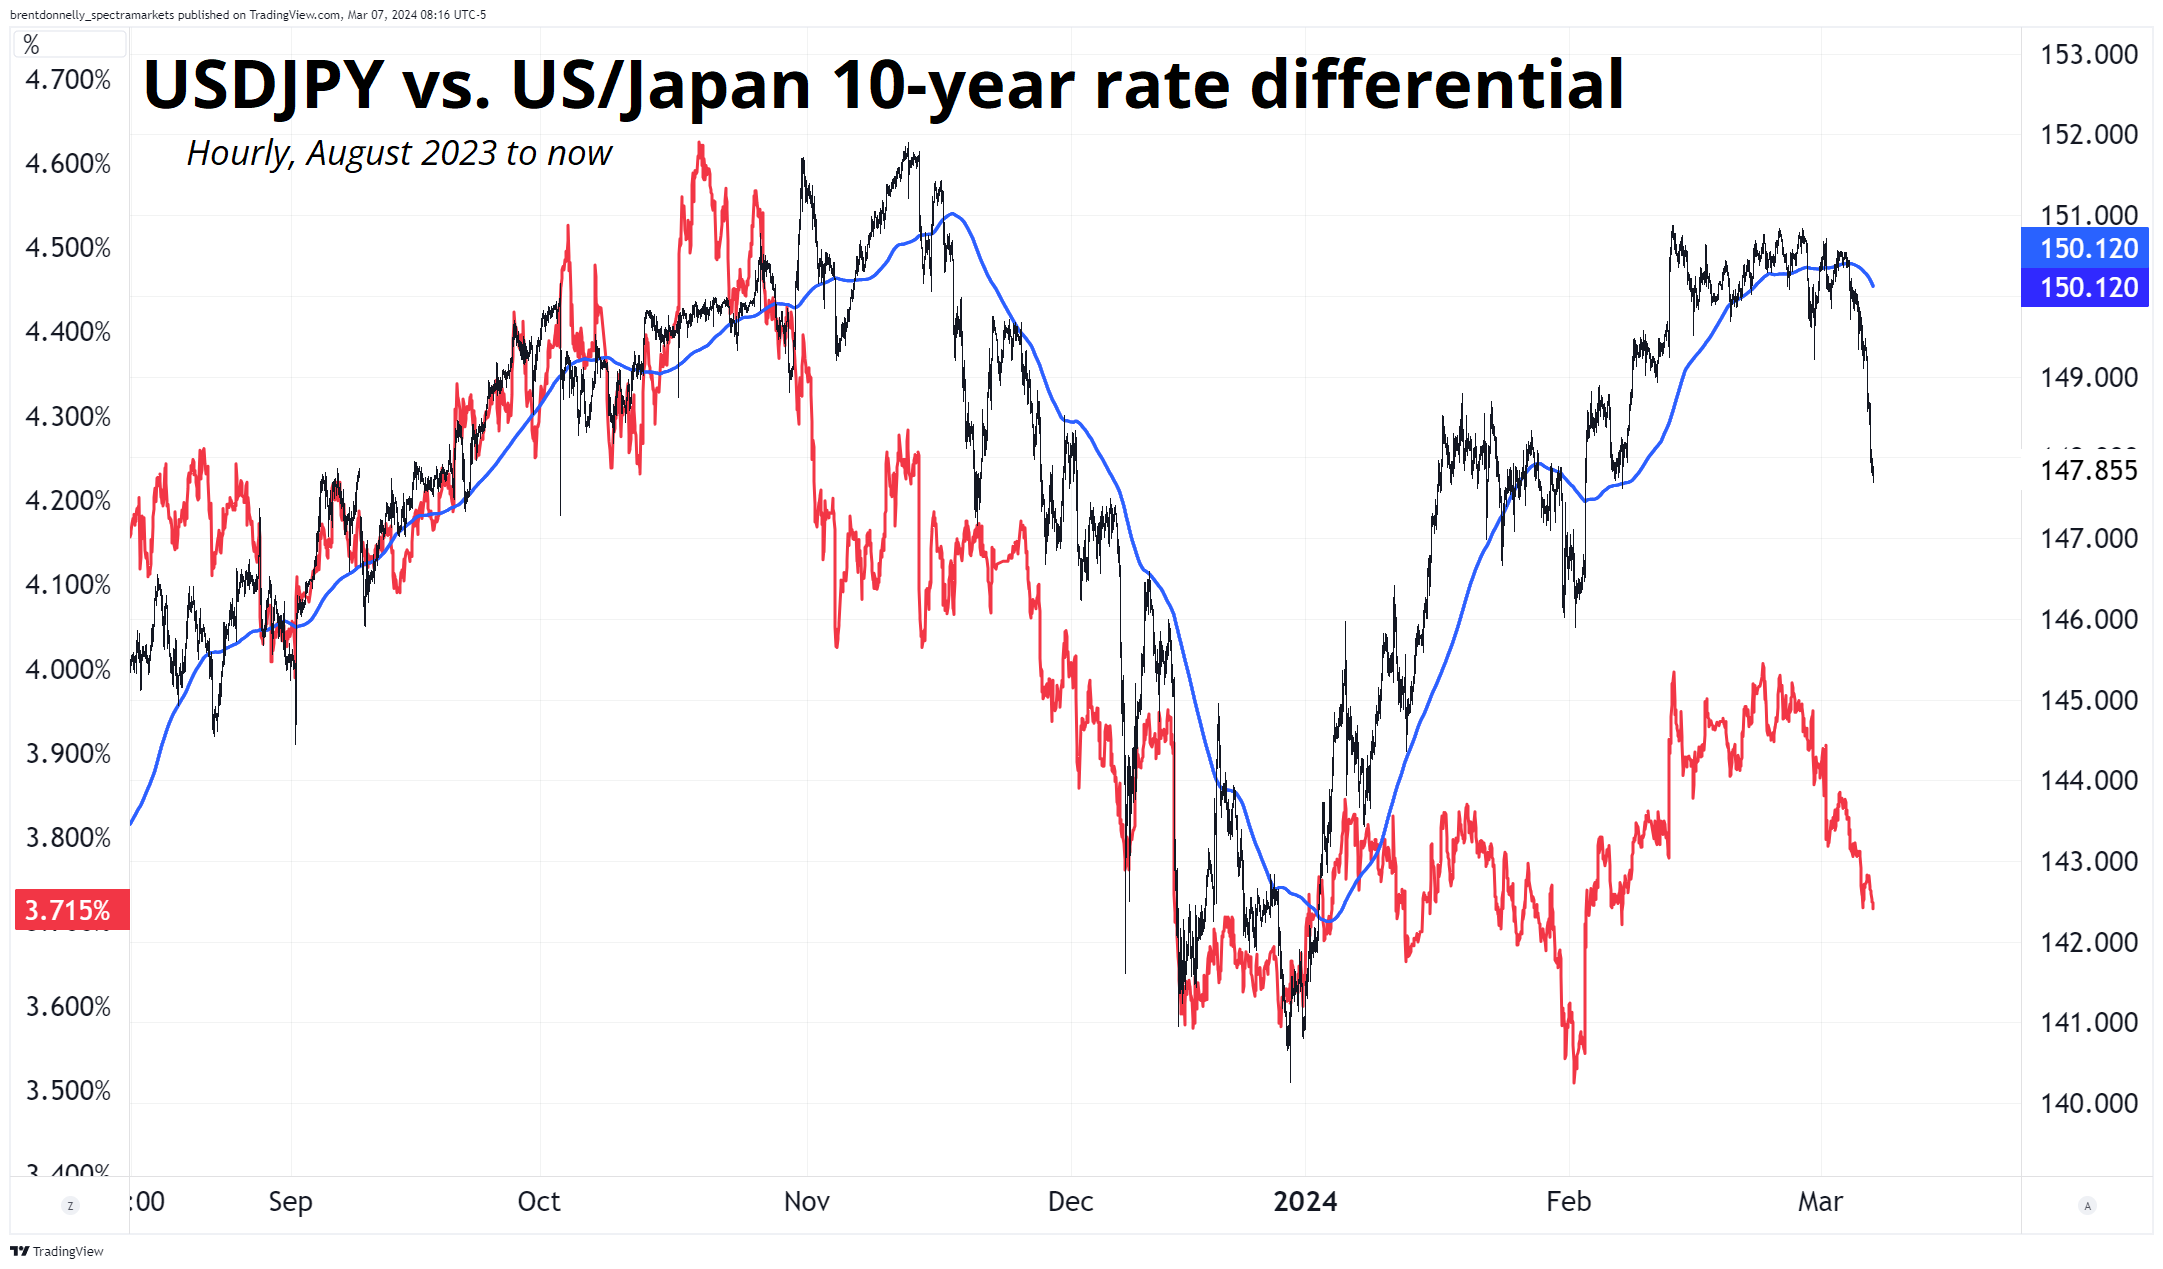 USDJPY vs. US/Japan 10-year rate differential